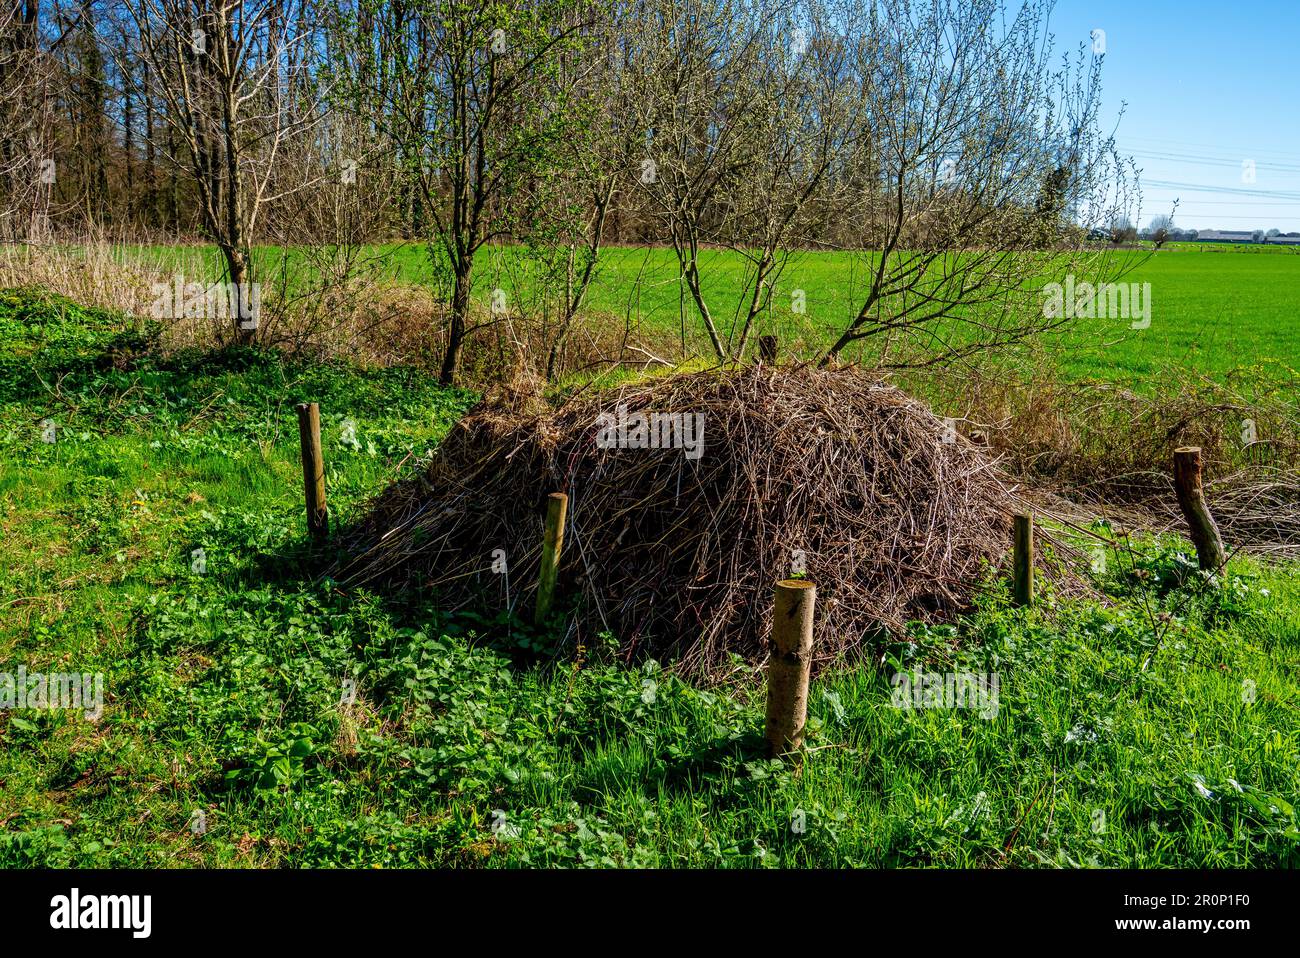 Green waste pile as a breeding place for reptiles like snakes in the Netherlands Stock Photo